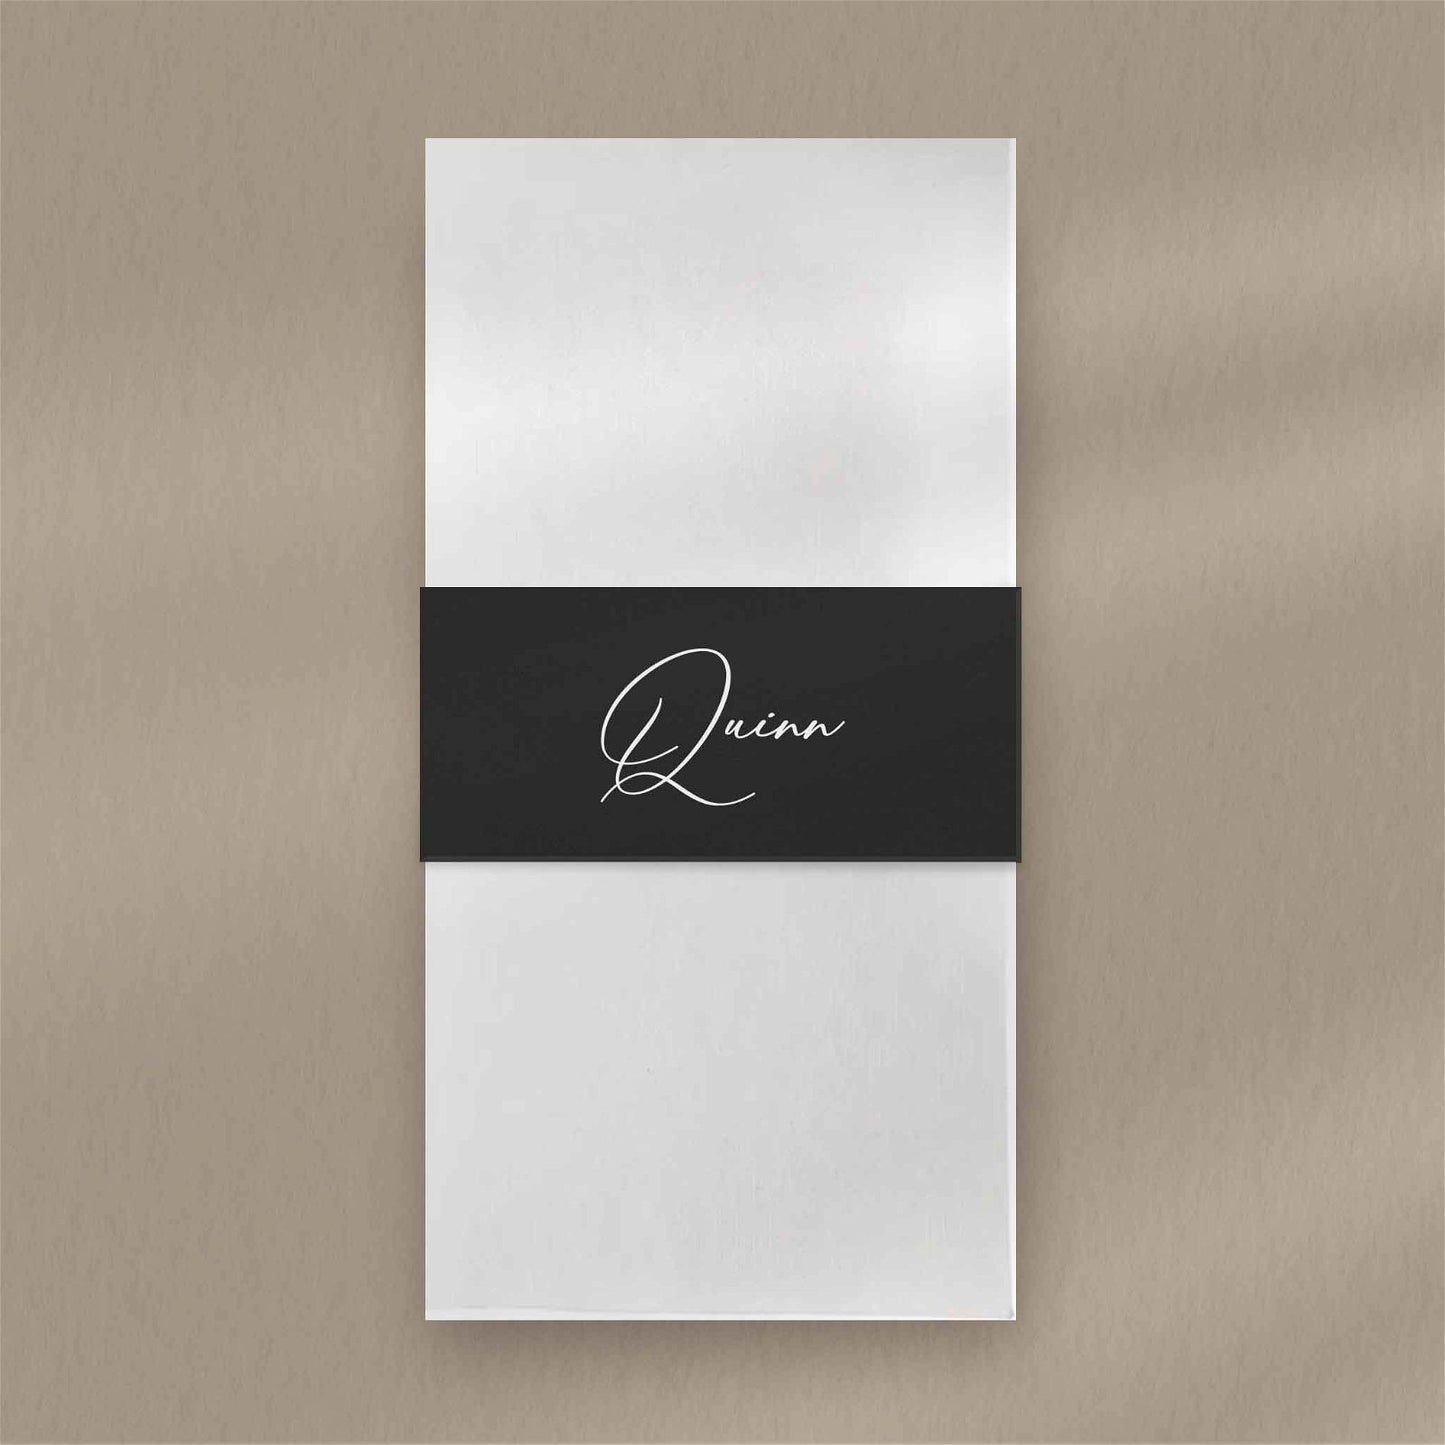 Quinn Place Card  Ivy and Gold Wedding Stationery   